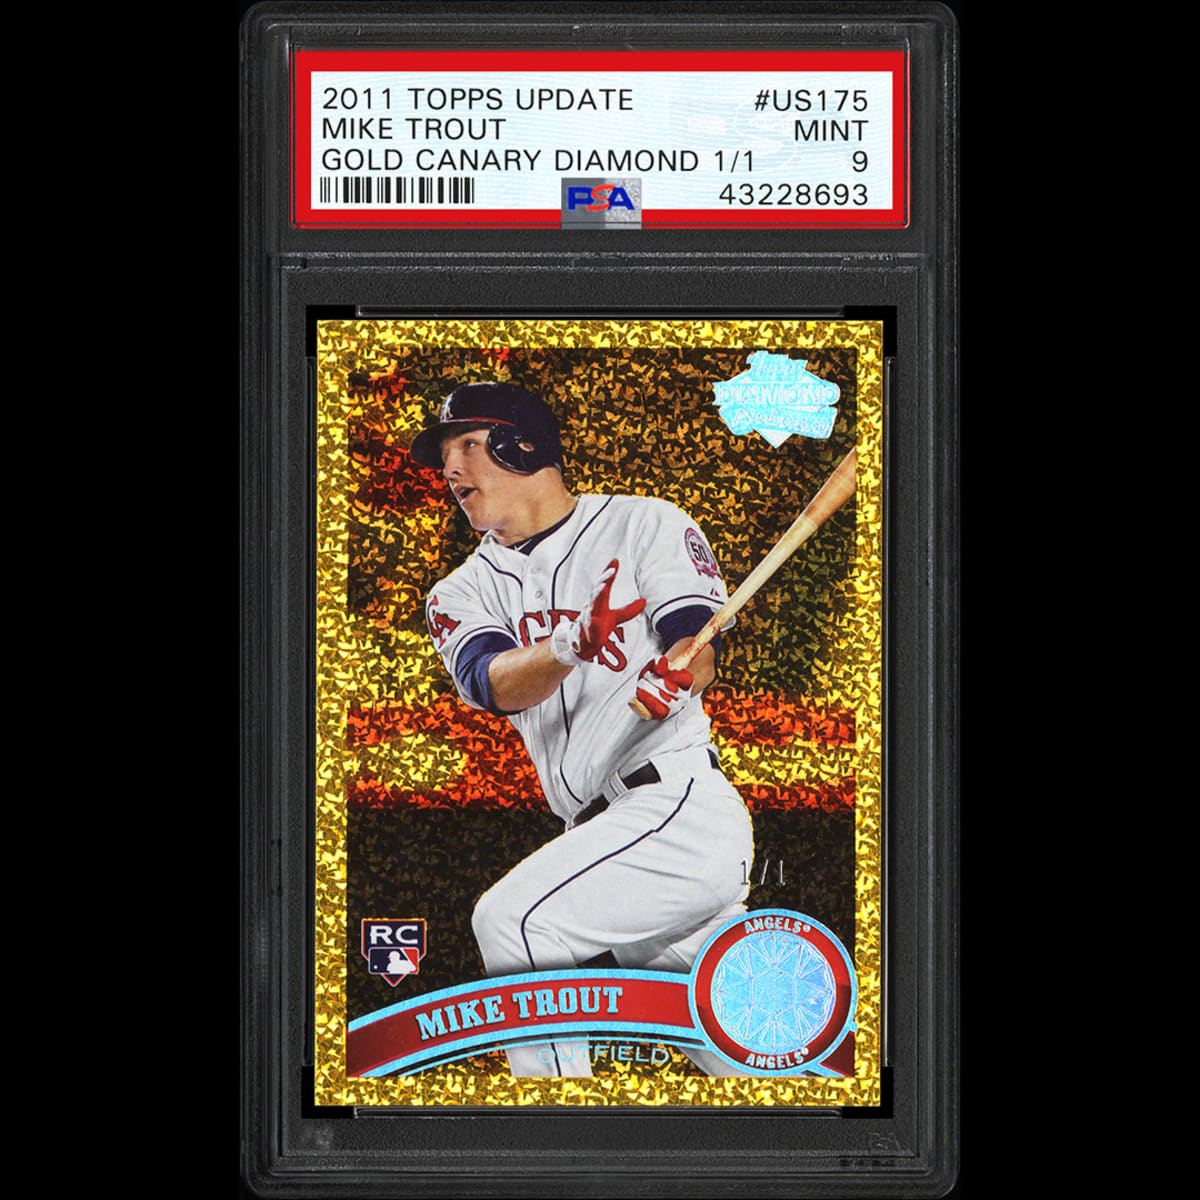 History of baseball card grading shows rise of PSA, BGS and - Sports Collectors Digest